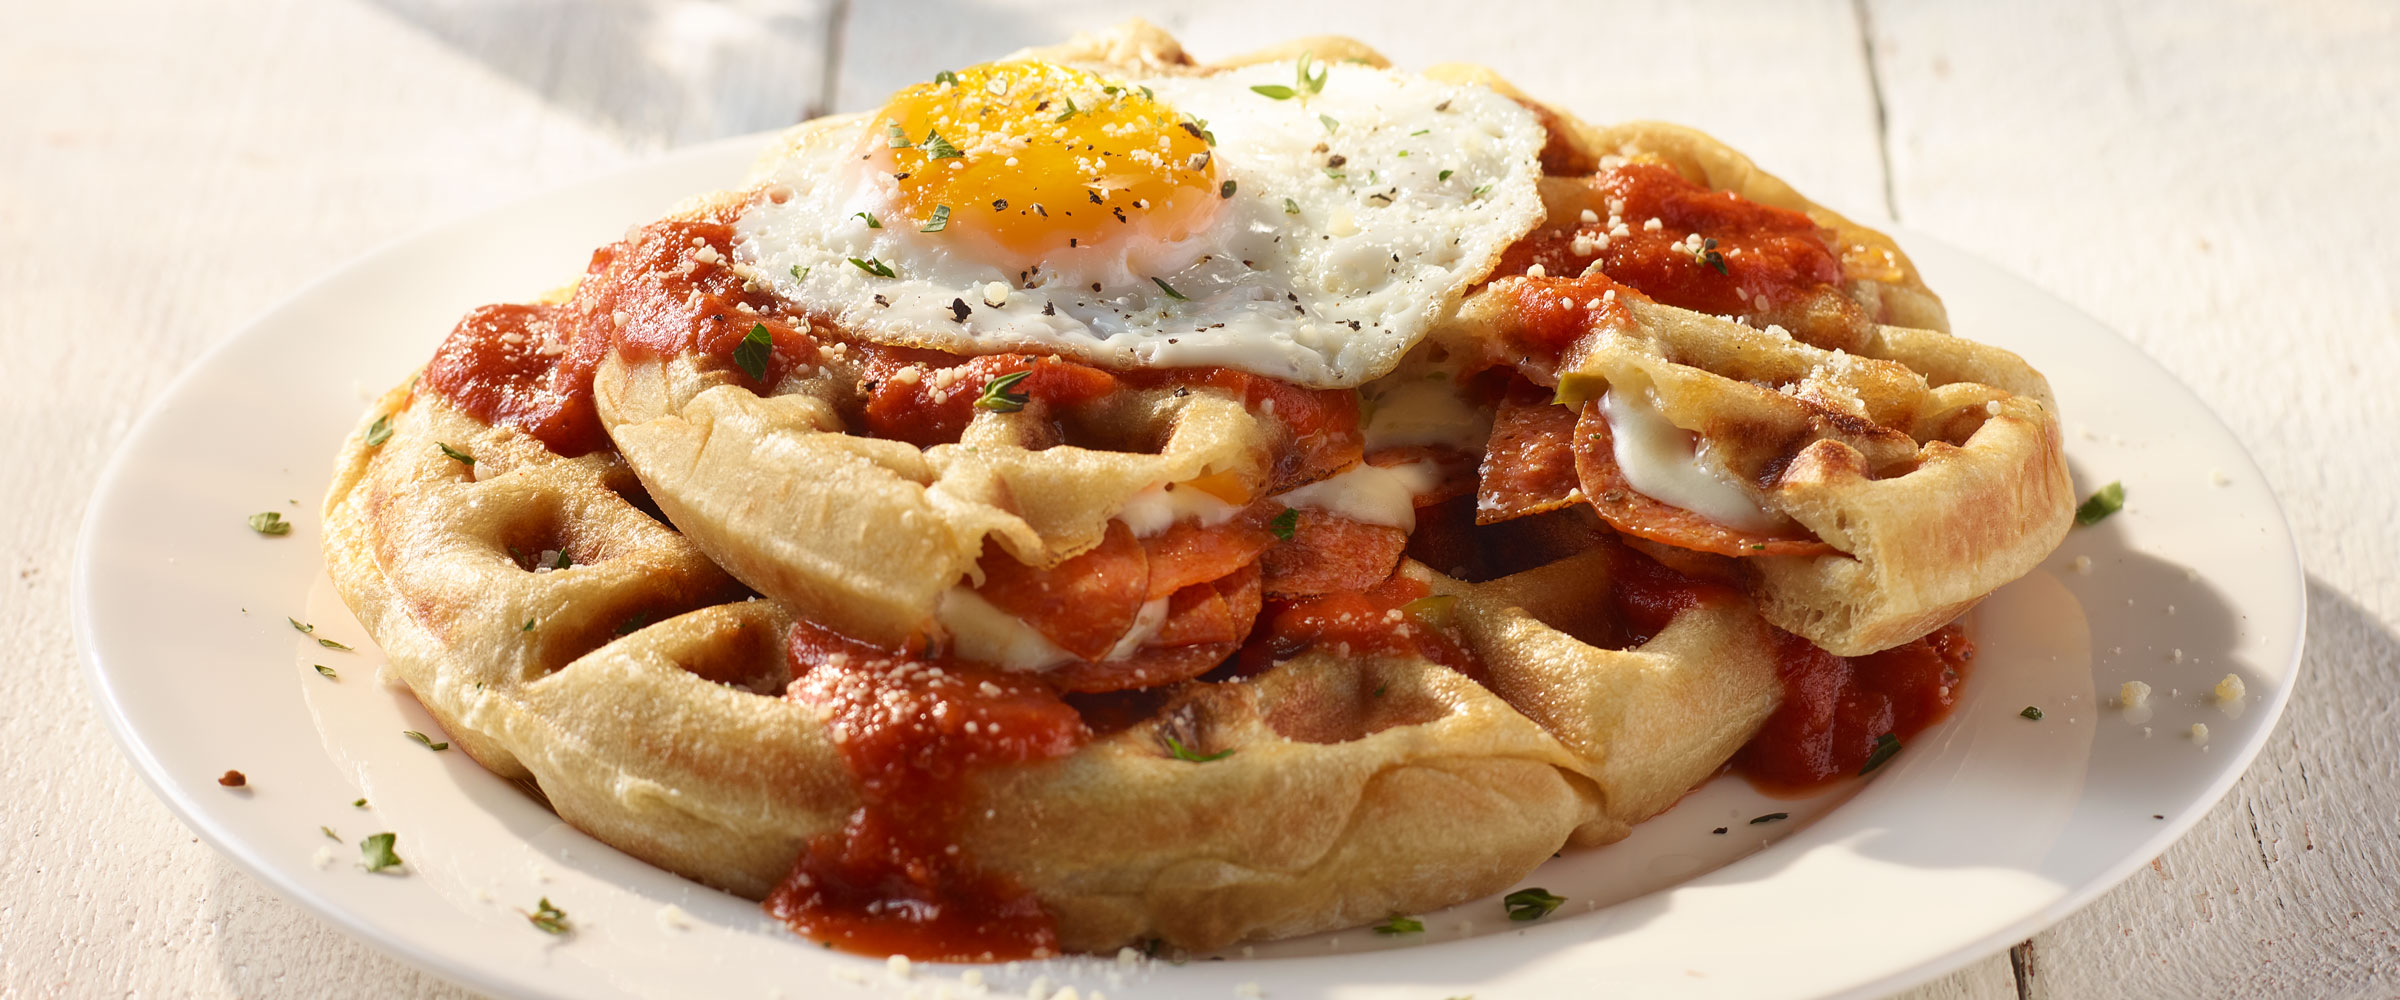 Savory Pepperoni Pizza Waffles with Egg on top on white plate